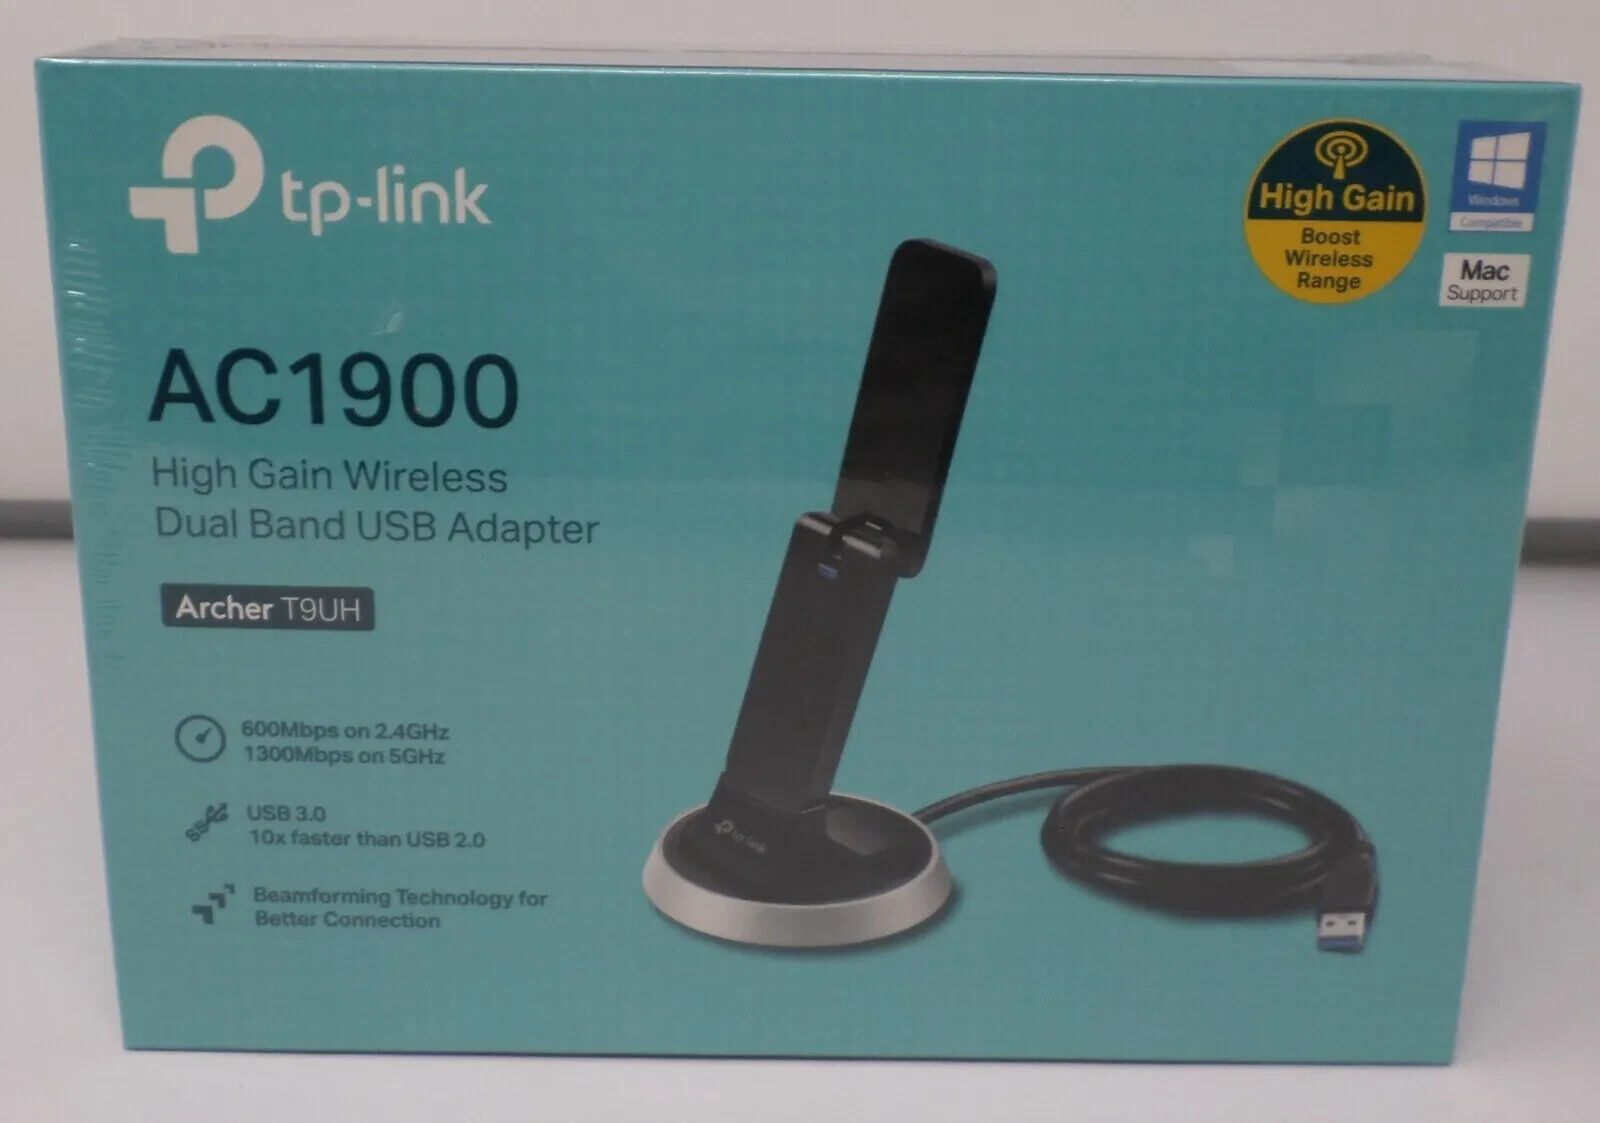 TP-Link Archer T9UH AC1900 High Gain Wireless Dual Band USB 3.0 Wi-Fi Adapter